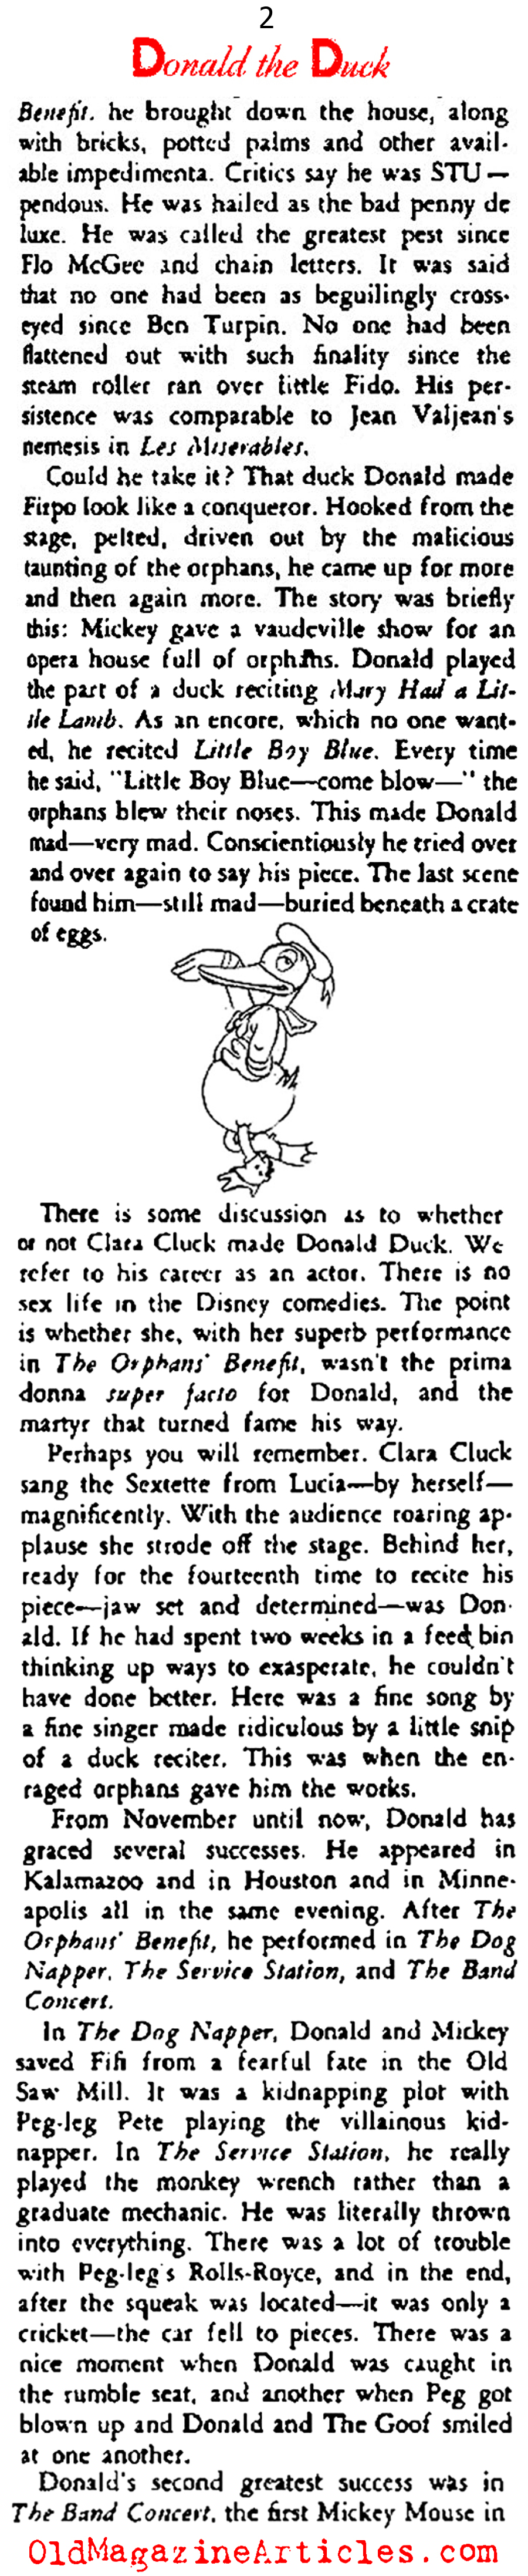 The Birth of Donald Duck  (Stage Magazine, 1935)